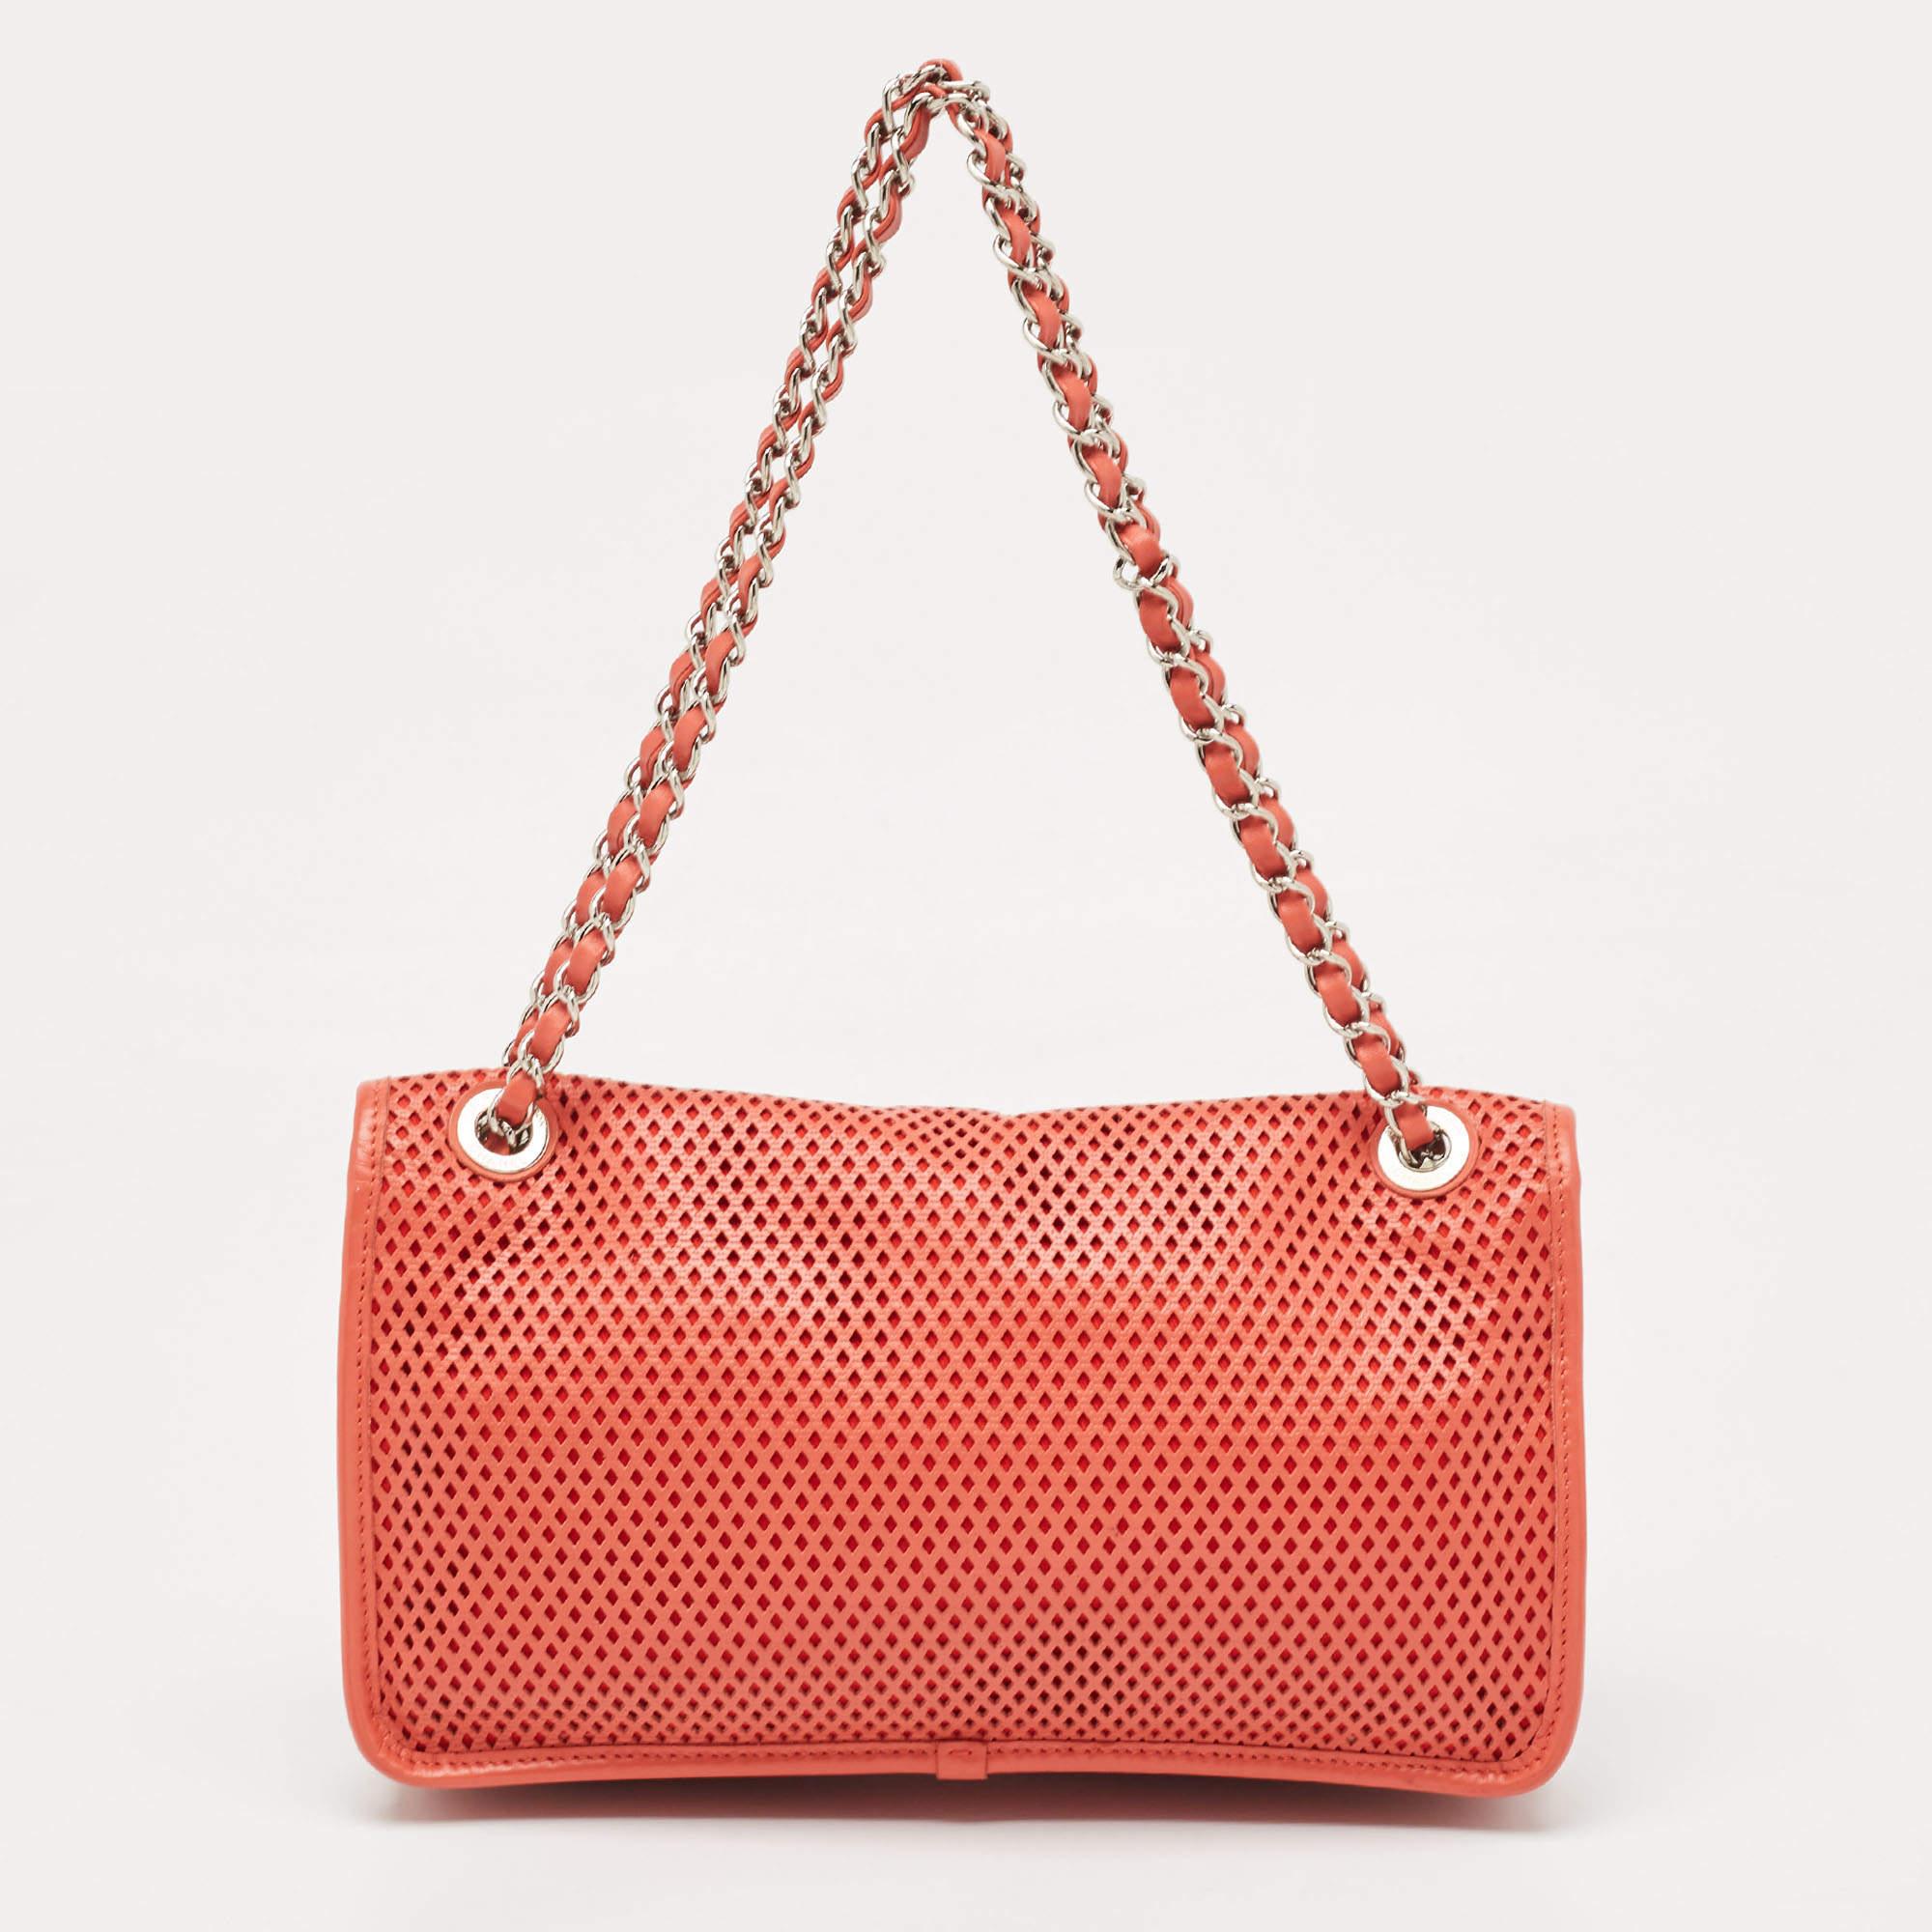 Women's Chanel Red Perforated Leather Up in the Air Flap Bag For Sale